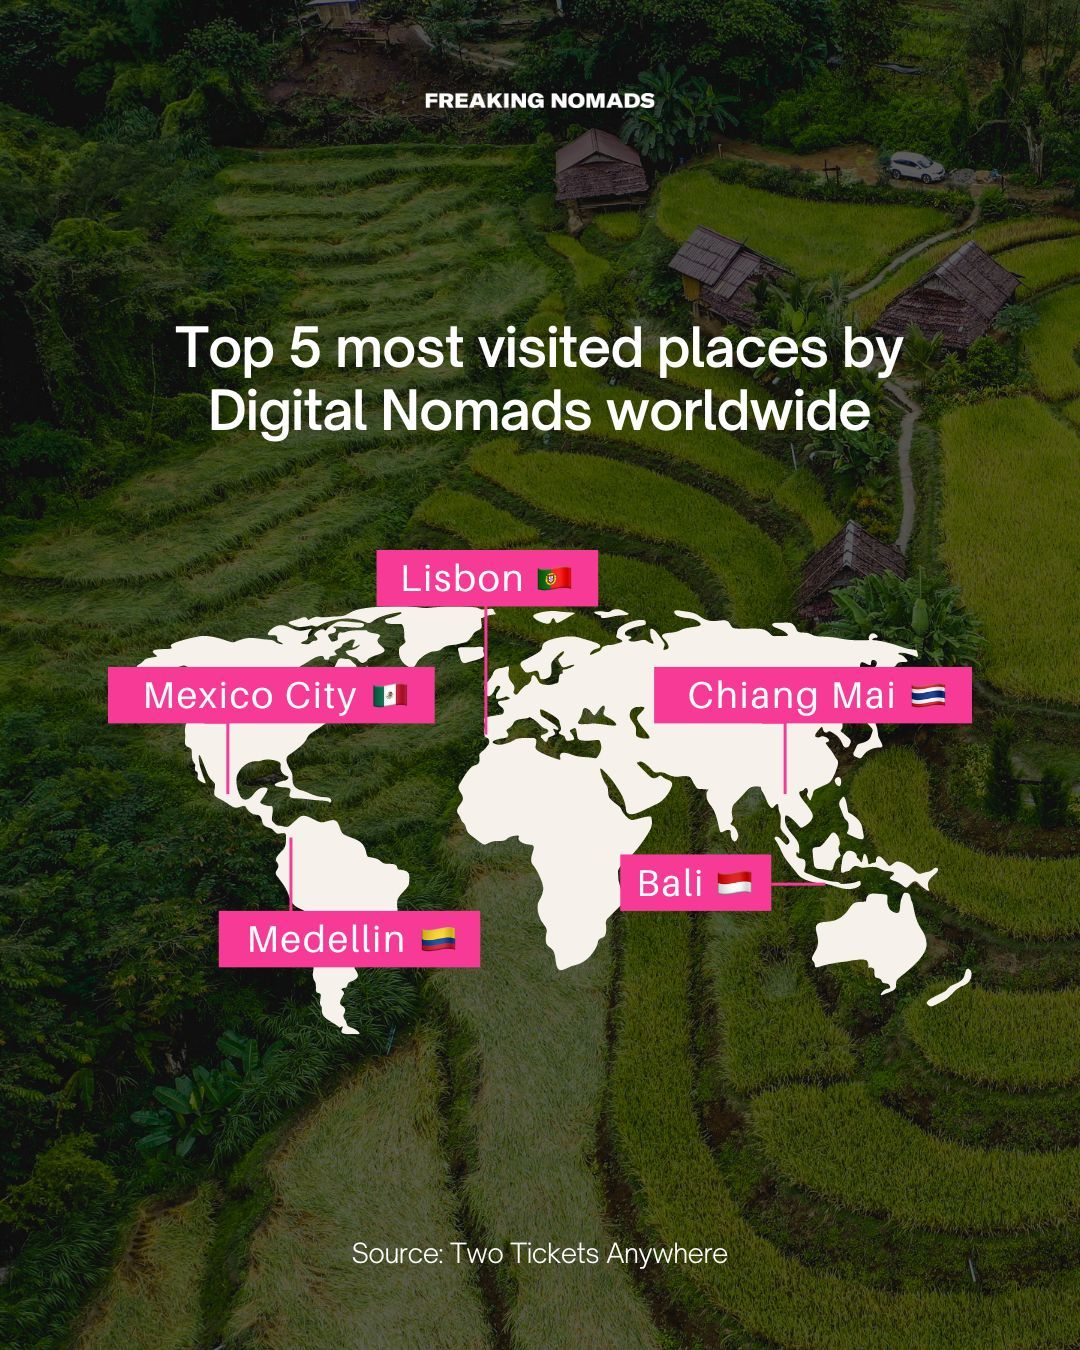 Infographic showing 5 most visited places by digital nomads worldwide